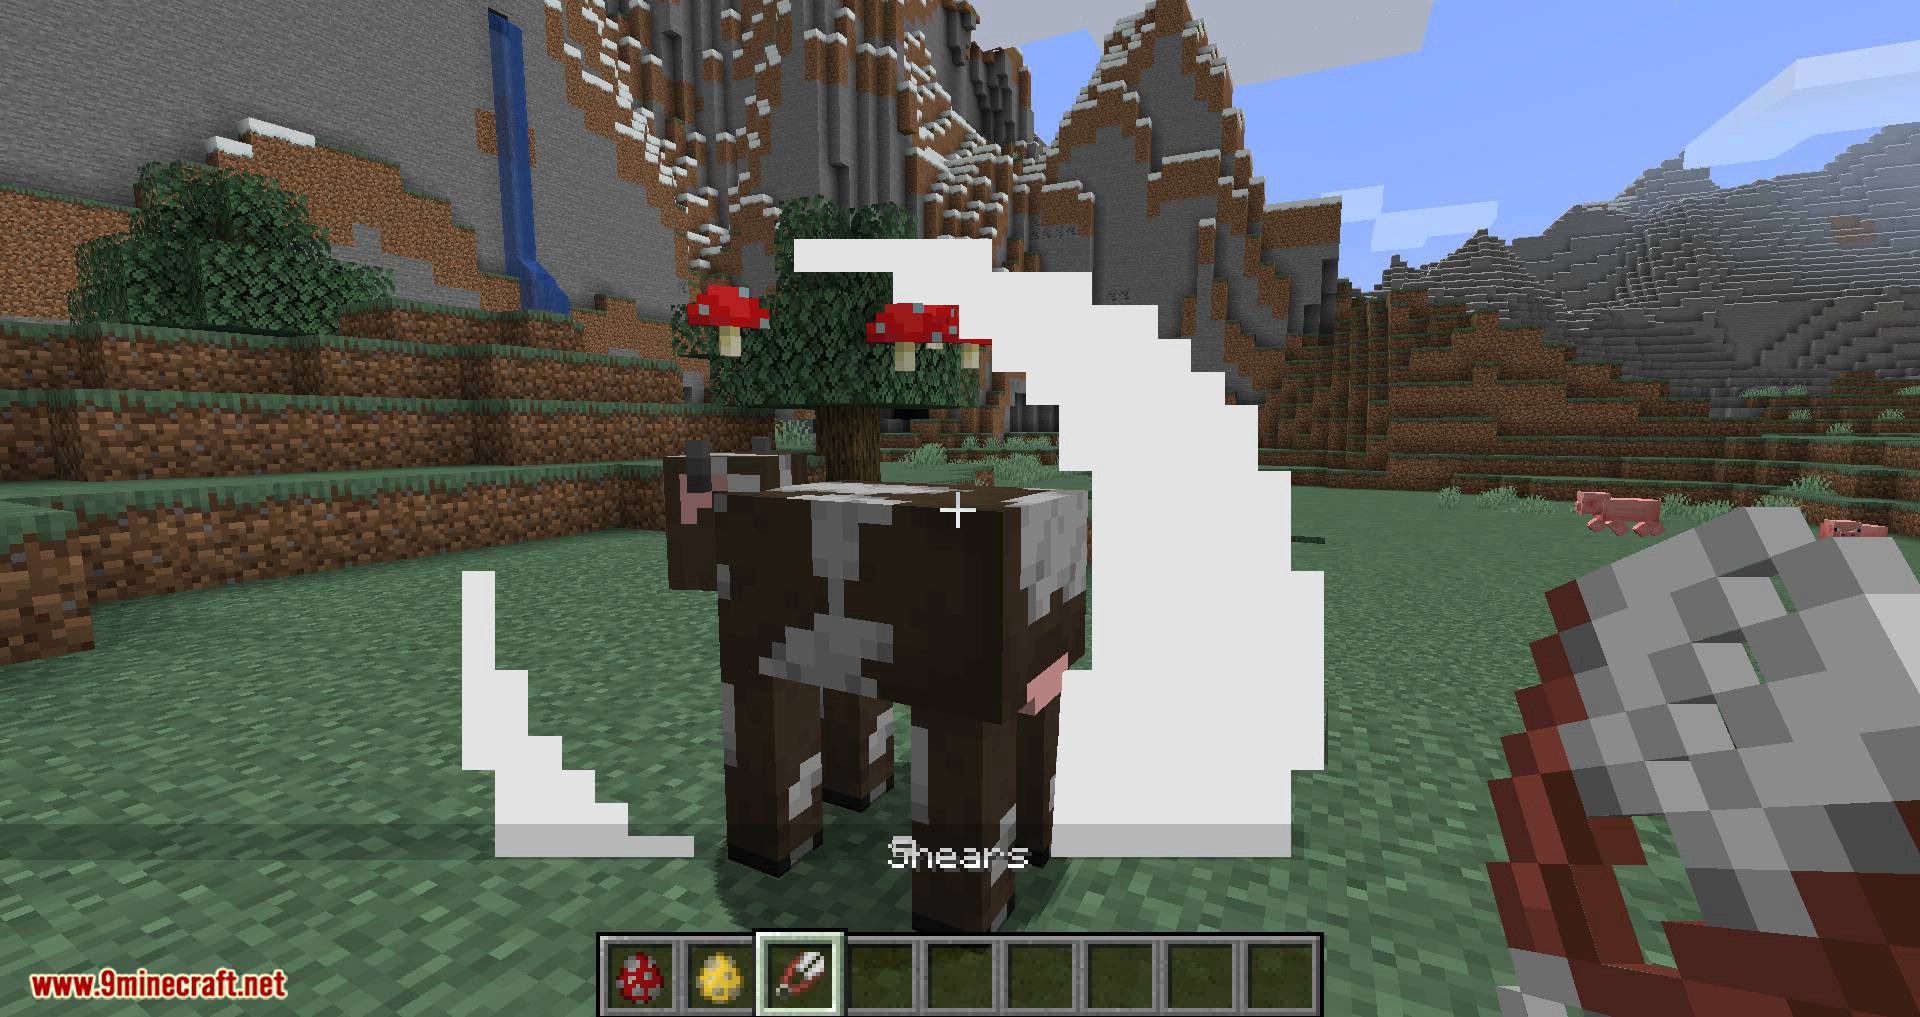 Mooblooms mod for minecraft 02.